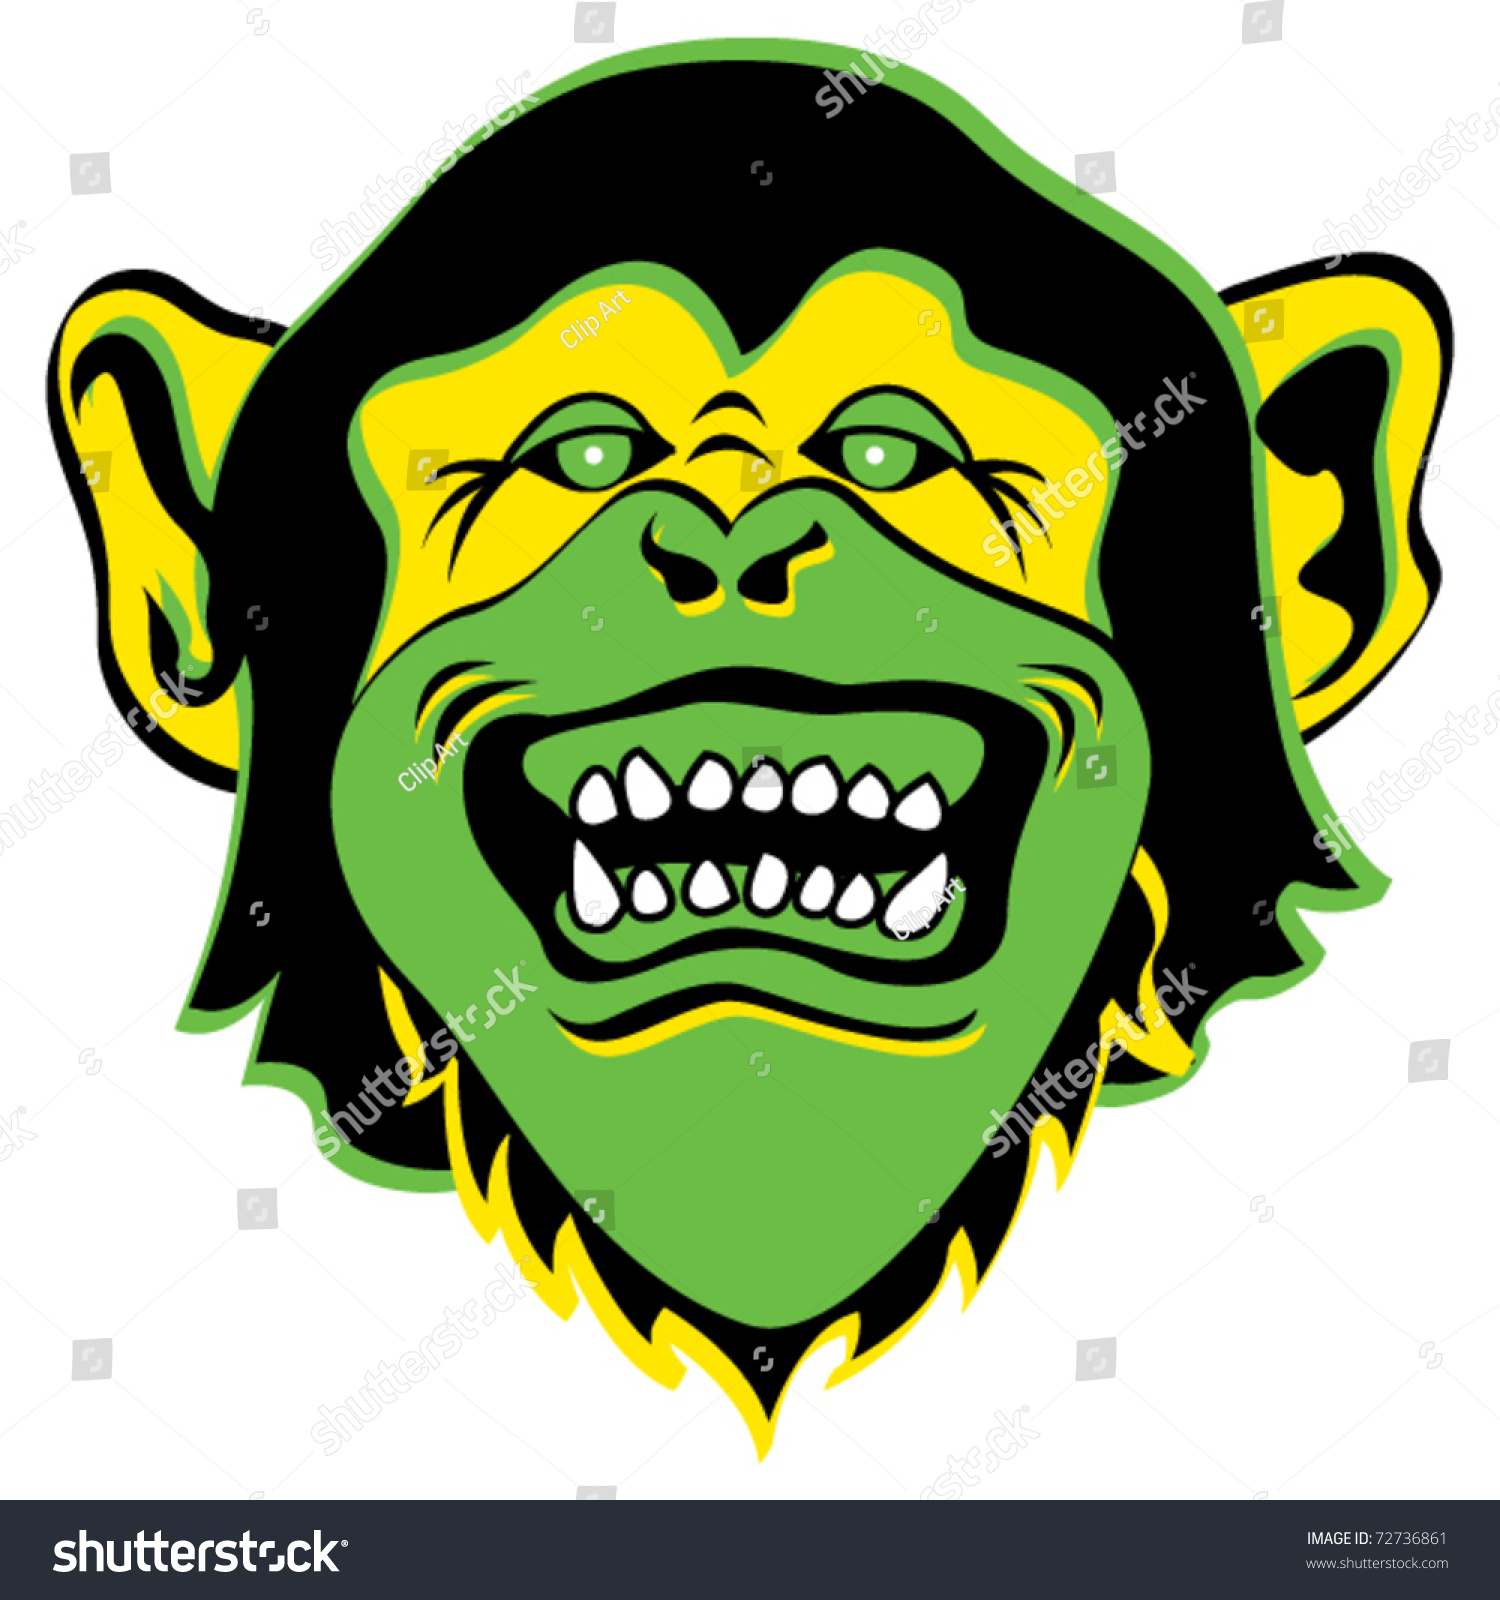 monkey laughing clipart - photo #32